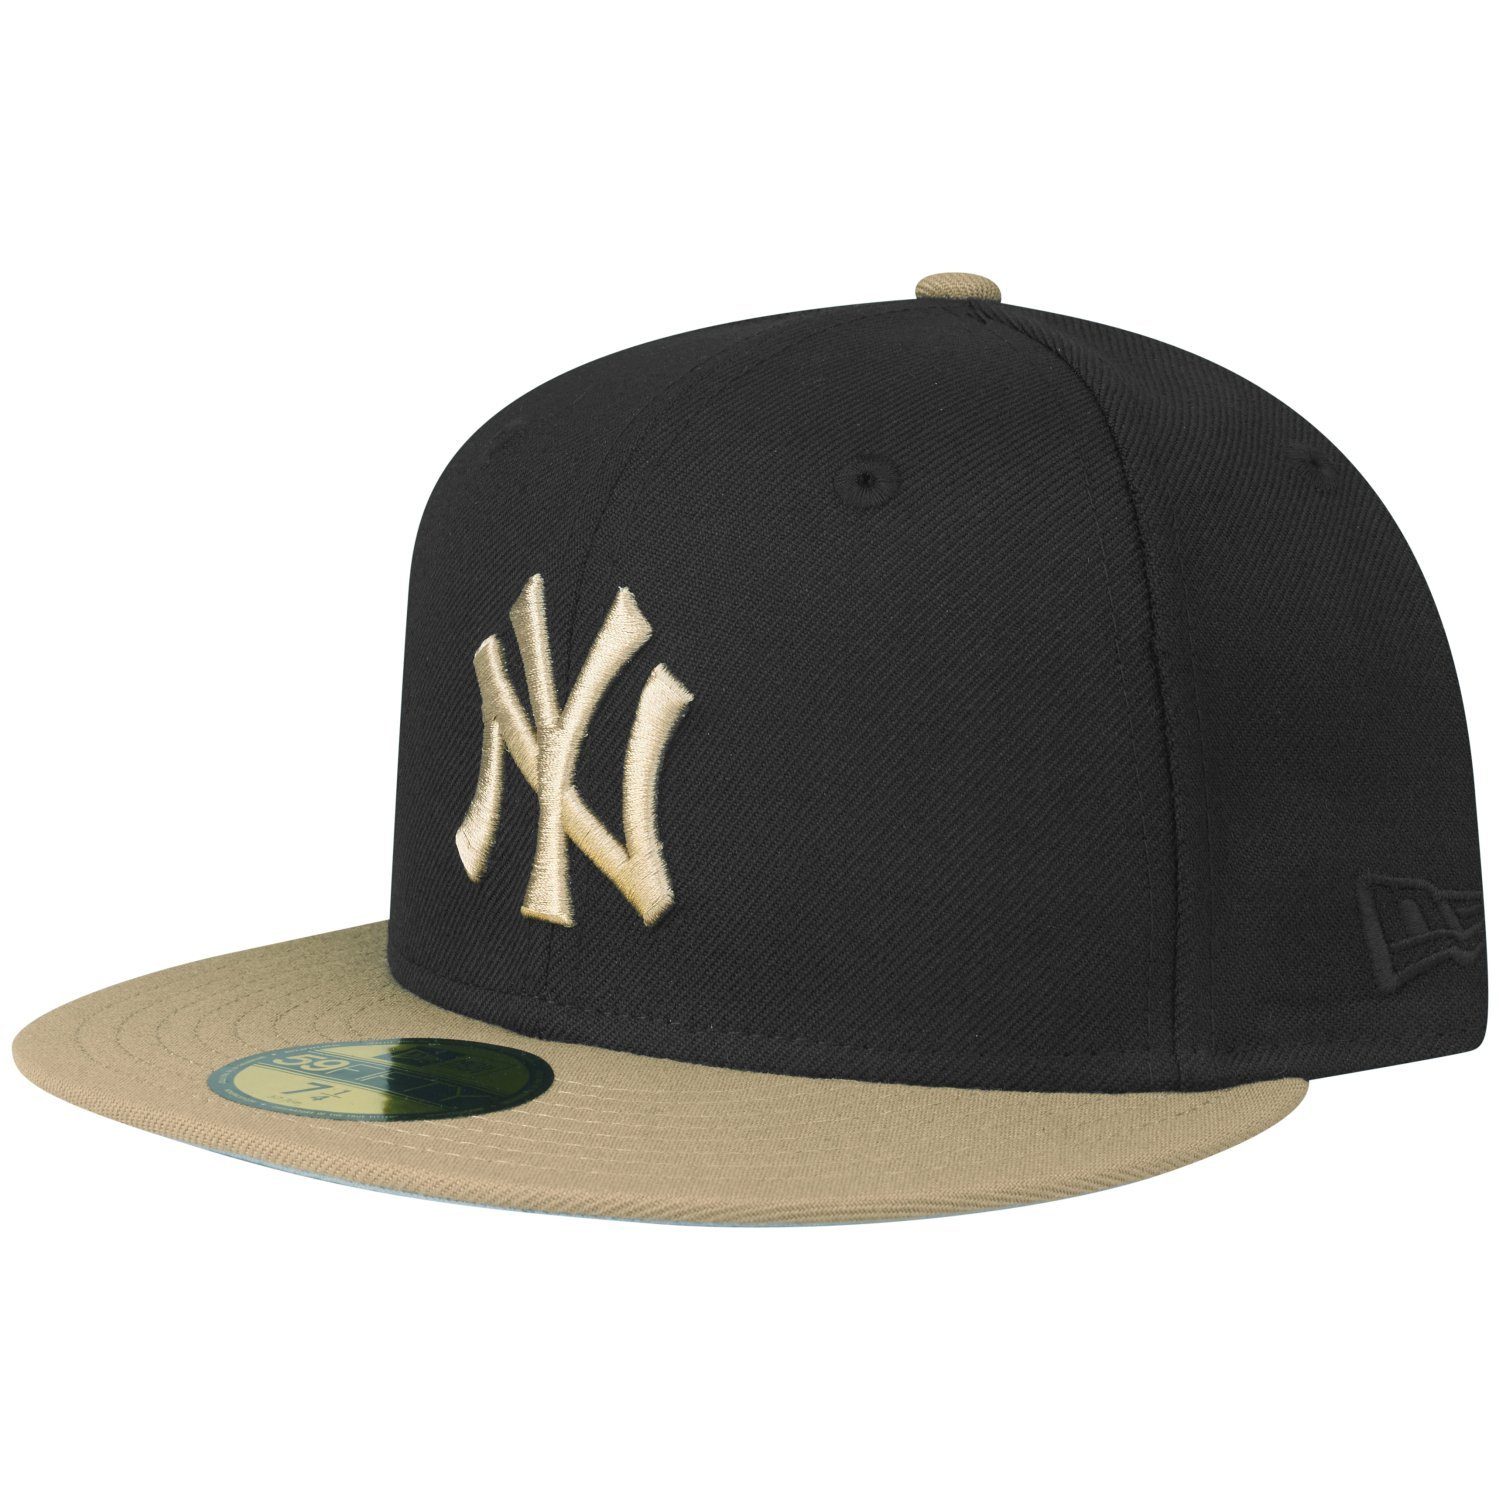 Yankees Fitted New New Cap York 59Fifty Era